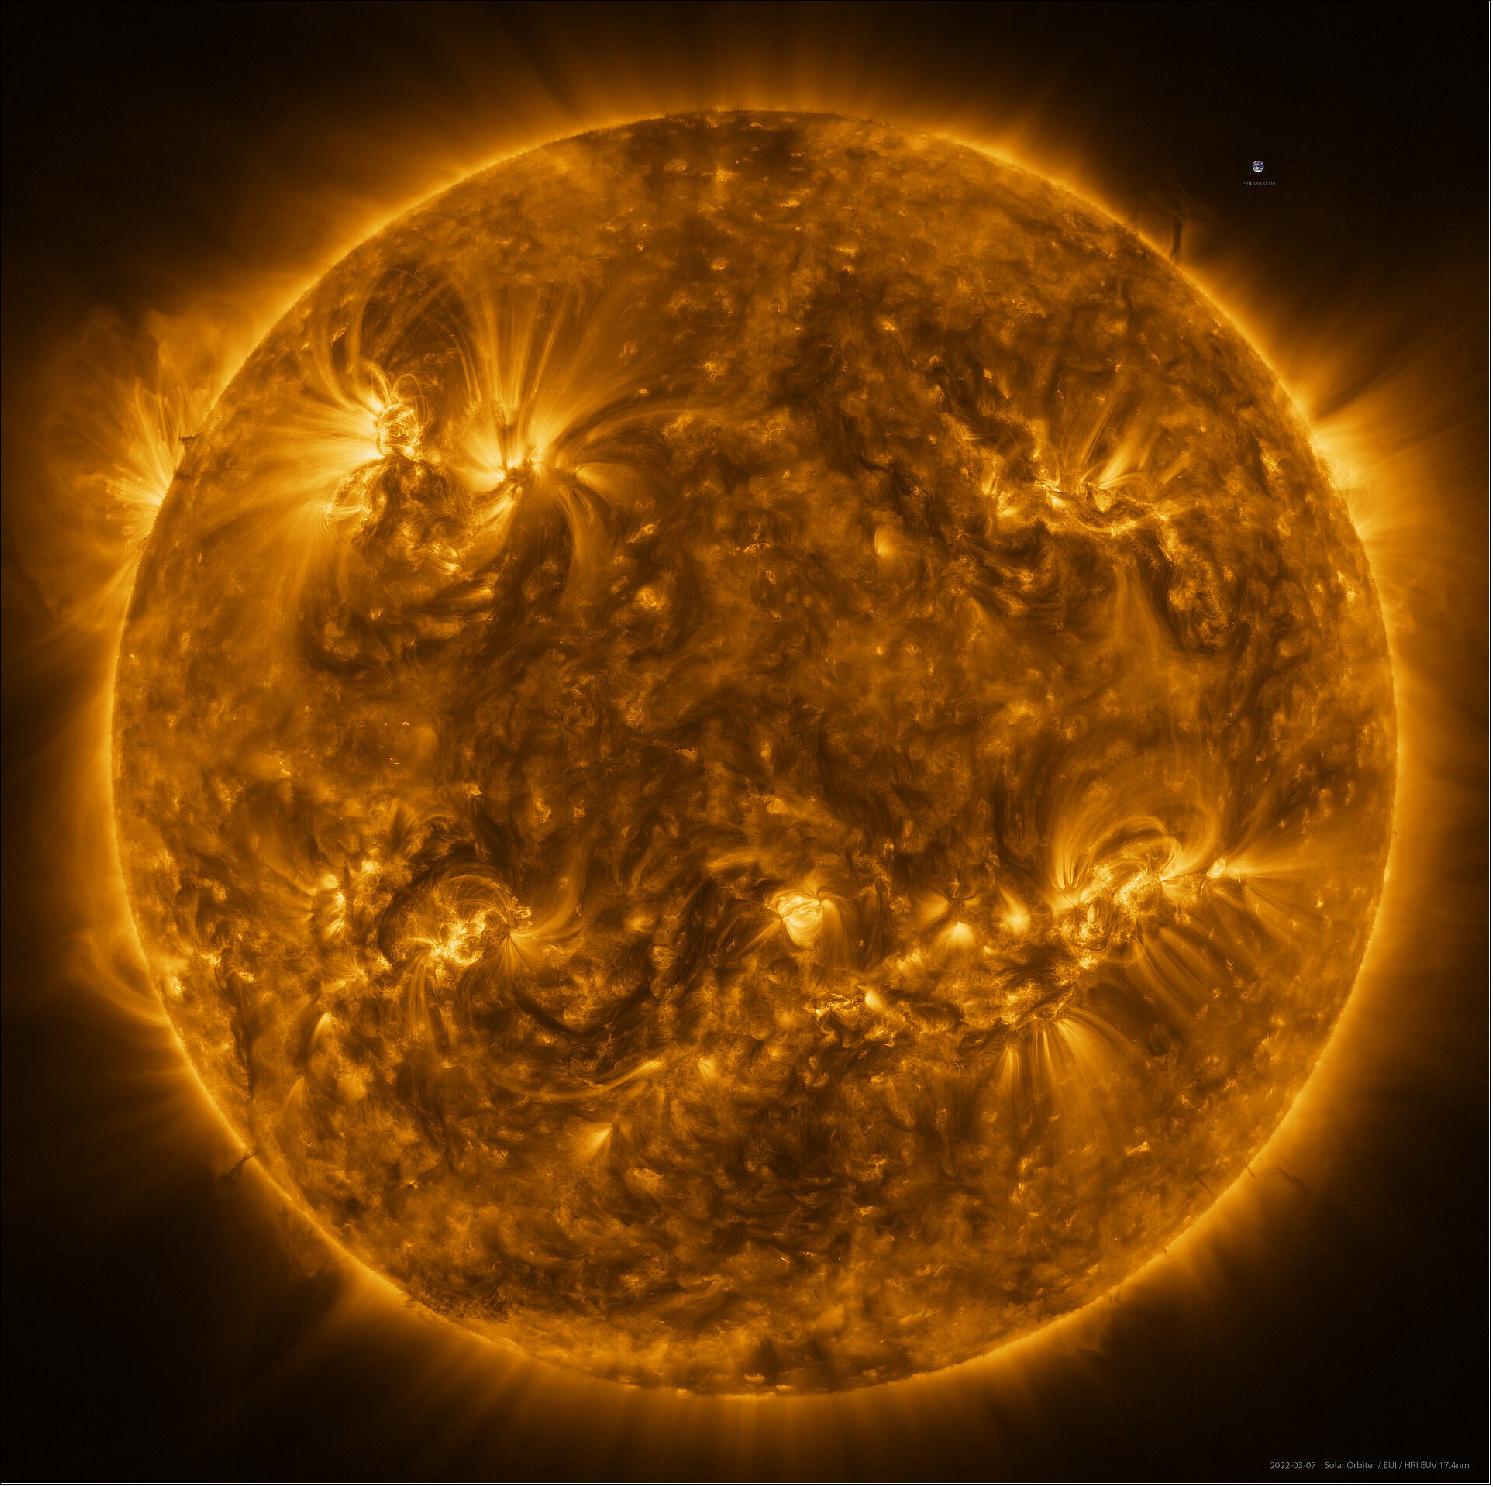 Figure 23: The Sun as seen by Solar Orbiter in extreme ultraviolet light from a distance of roughly 75 million km. The image is a mosaic of 25 individual images taken on 7 March by the high resolution telescope of the Extreme Ultraviolet Imager (EUI) instrument. Taken at a wavelength of 17 nanometers, in the extreme ultraviolet region of the electromagnetic spectrum, this image reveals the Sun's upper atmosphere, the corona, which has a temperature of around a million degrees Celsius. In total, the final image contains more than 83 million pixels in a 9148 x 9112 pixel grid, making it the highest resolution image of the Sun's full disc and outer atmosphere, the corona, ever taken. - An image of Earth is also included for scale, at the 2 o'clock position [image credit: ESA & NASA/Solar Orbiter/EUI team; Data processing: E. Kraaikamp (ROB)]